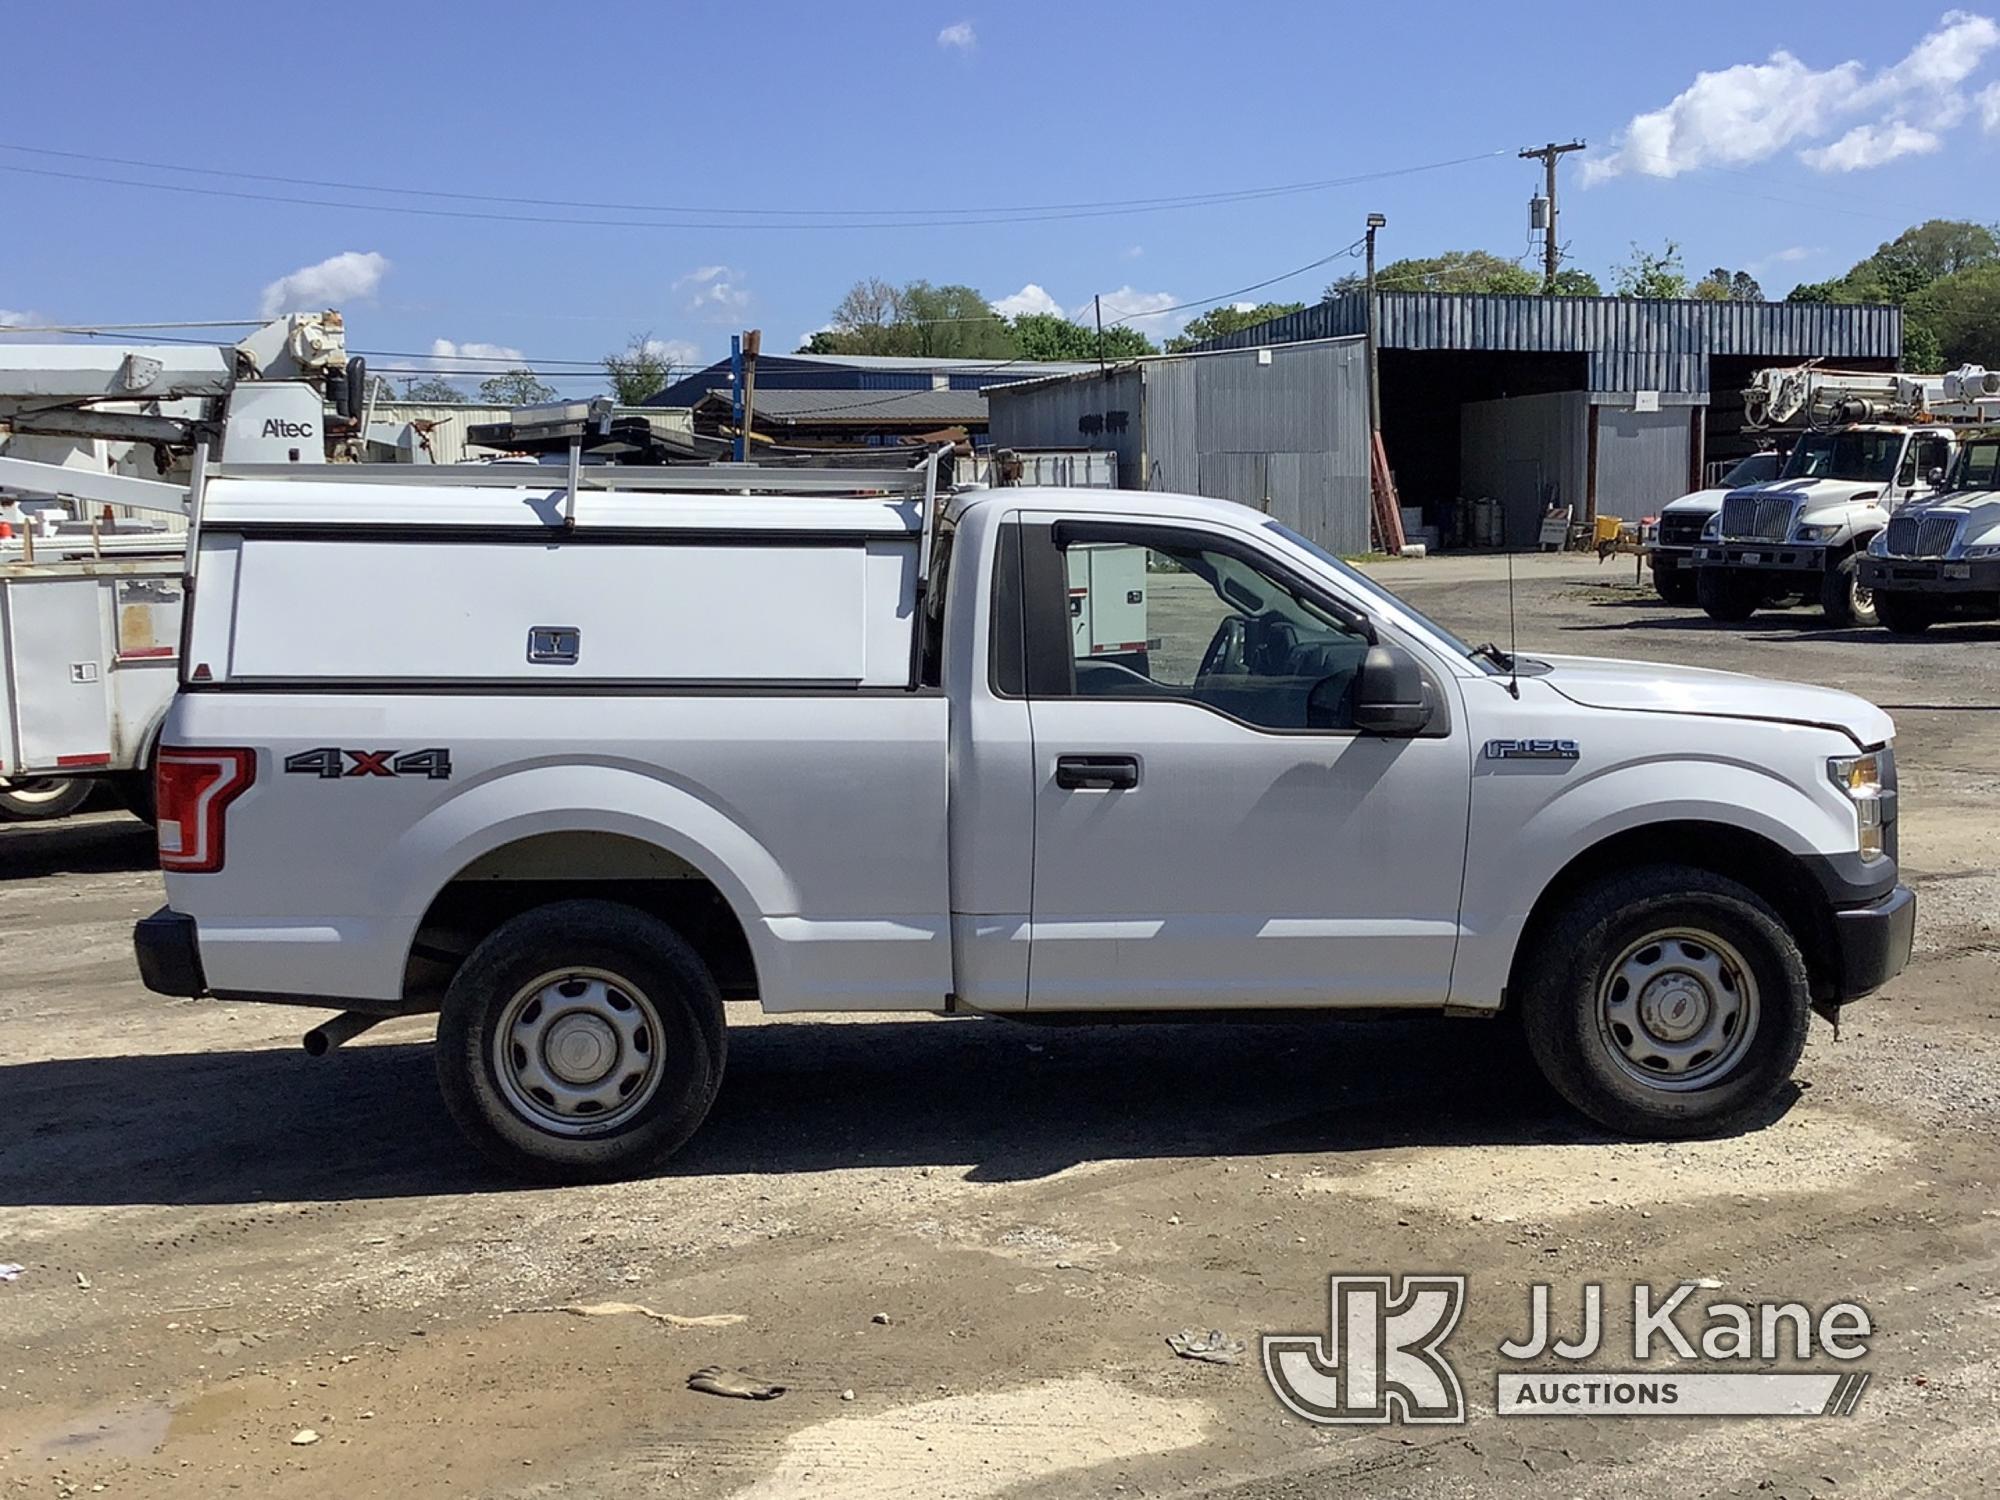 (Harmans, MD) 2016 Ford F150 Pickup Truck Runs & Moves, Rust & Body Damage